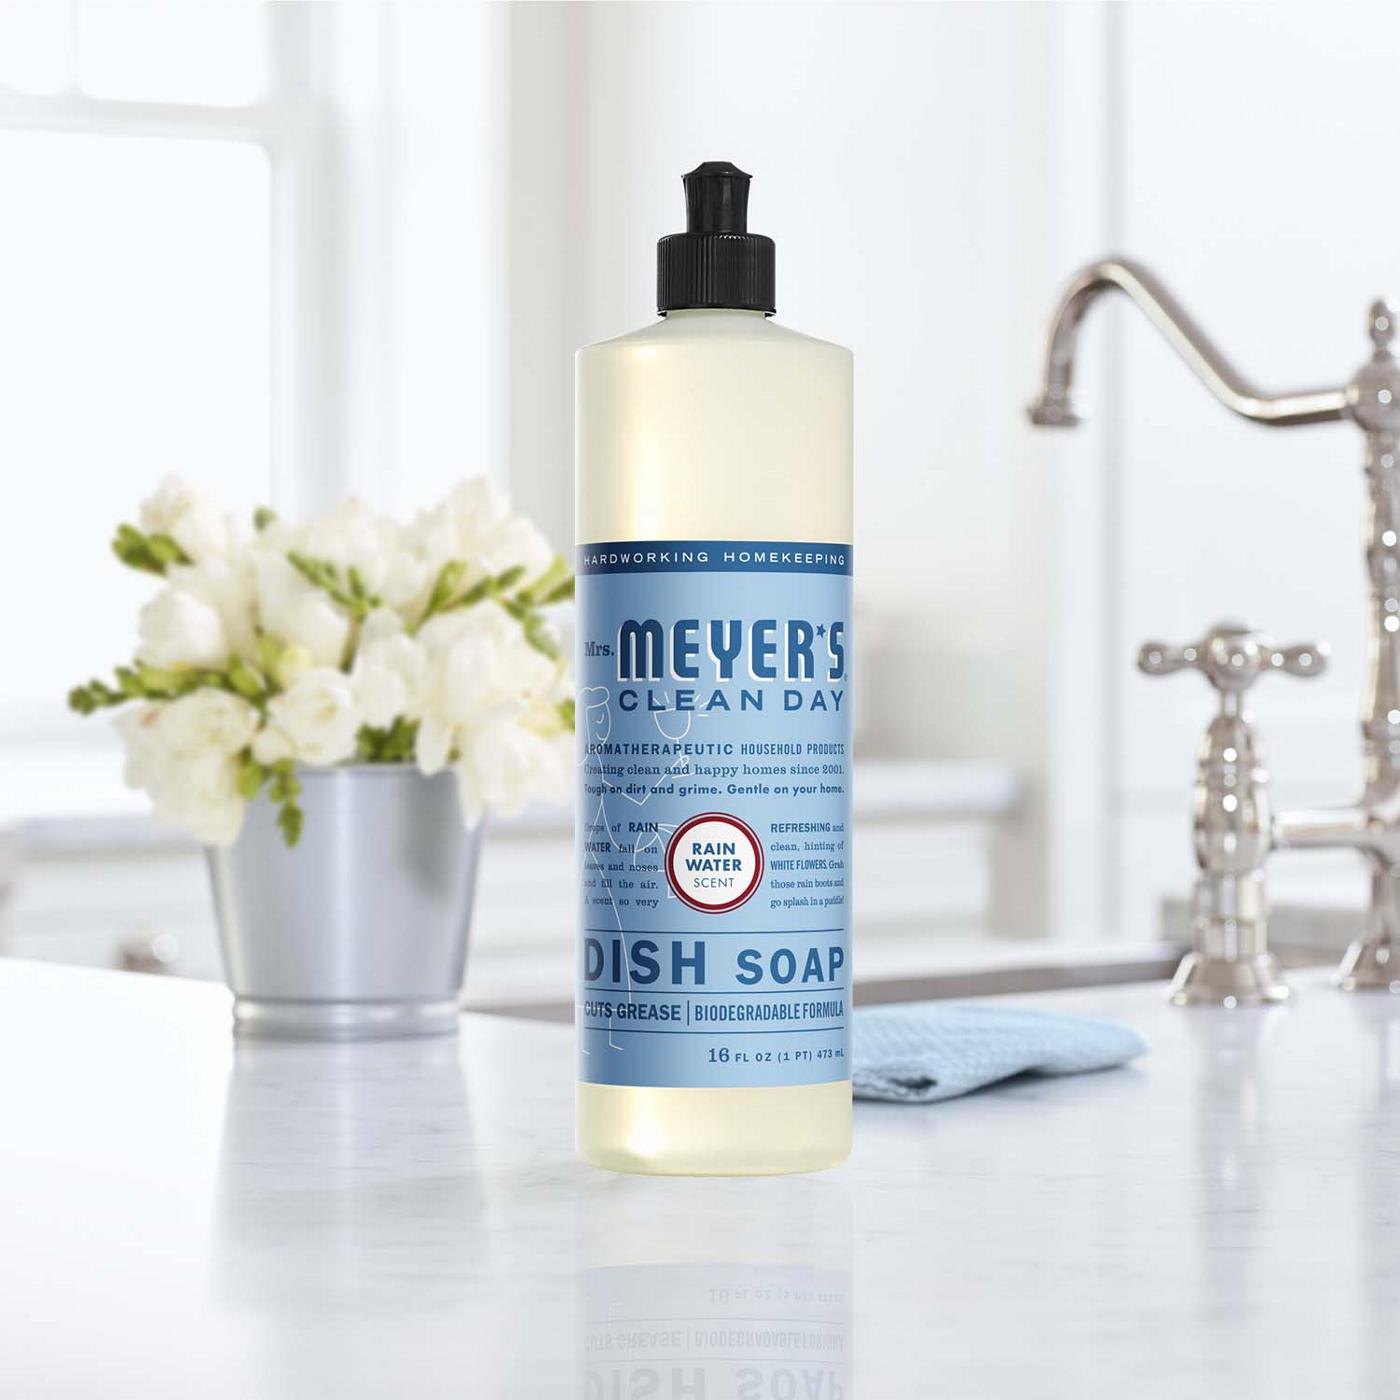 Mrs. Meyer's Clean Day Rainwater Dish Soap; image 3 of 6